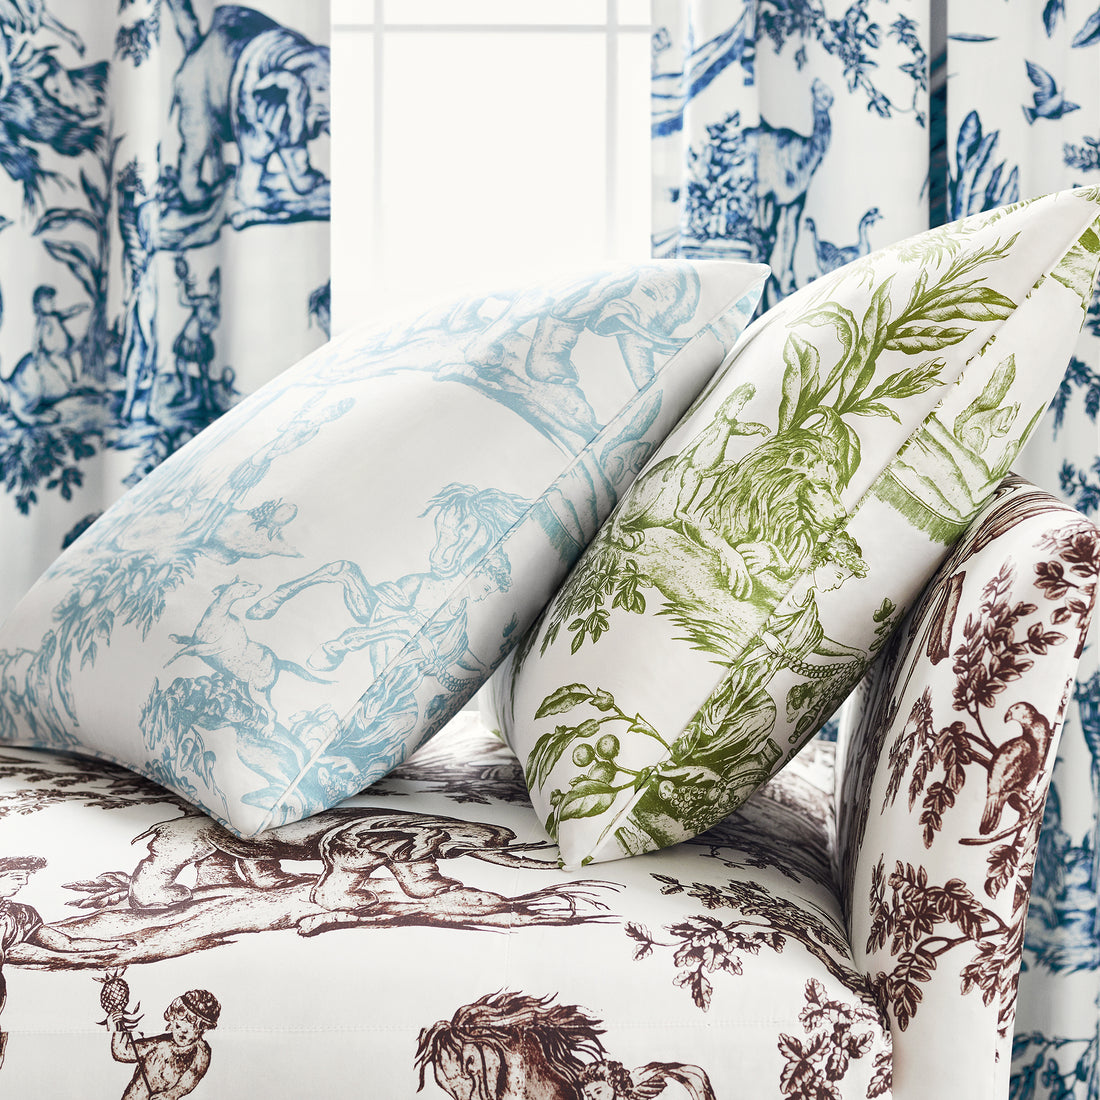 Pillow in Antilles Toile printed fabric in Spa Blue - pattern number AF15170 - by Anna French in the Antilles collection